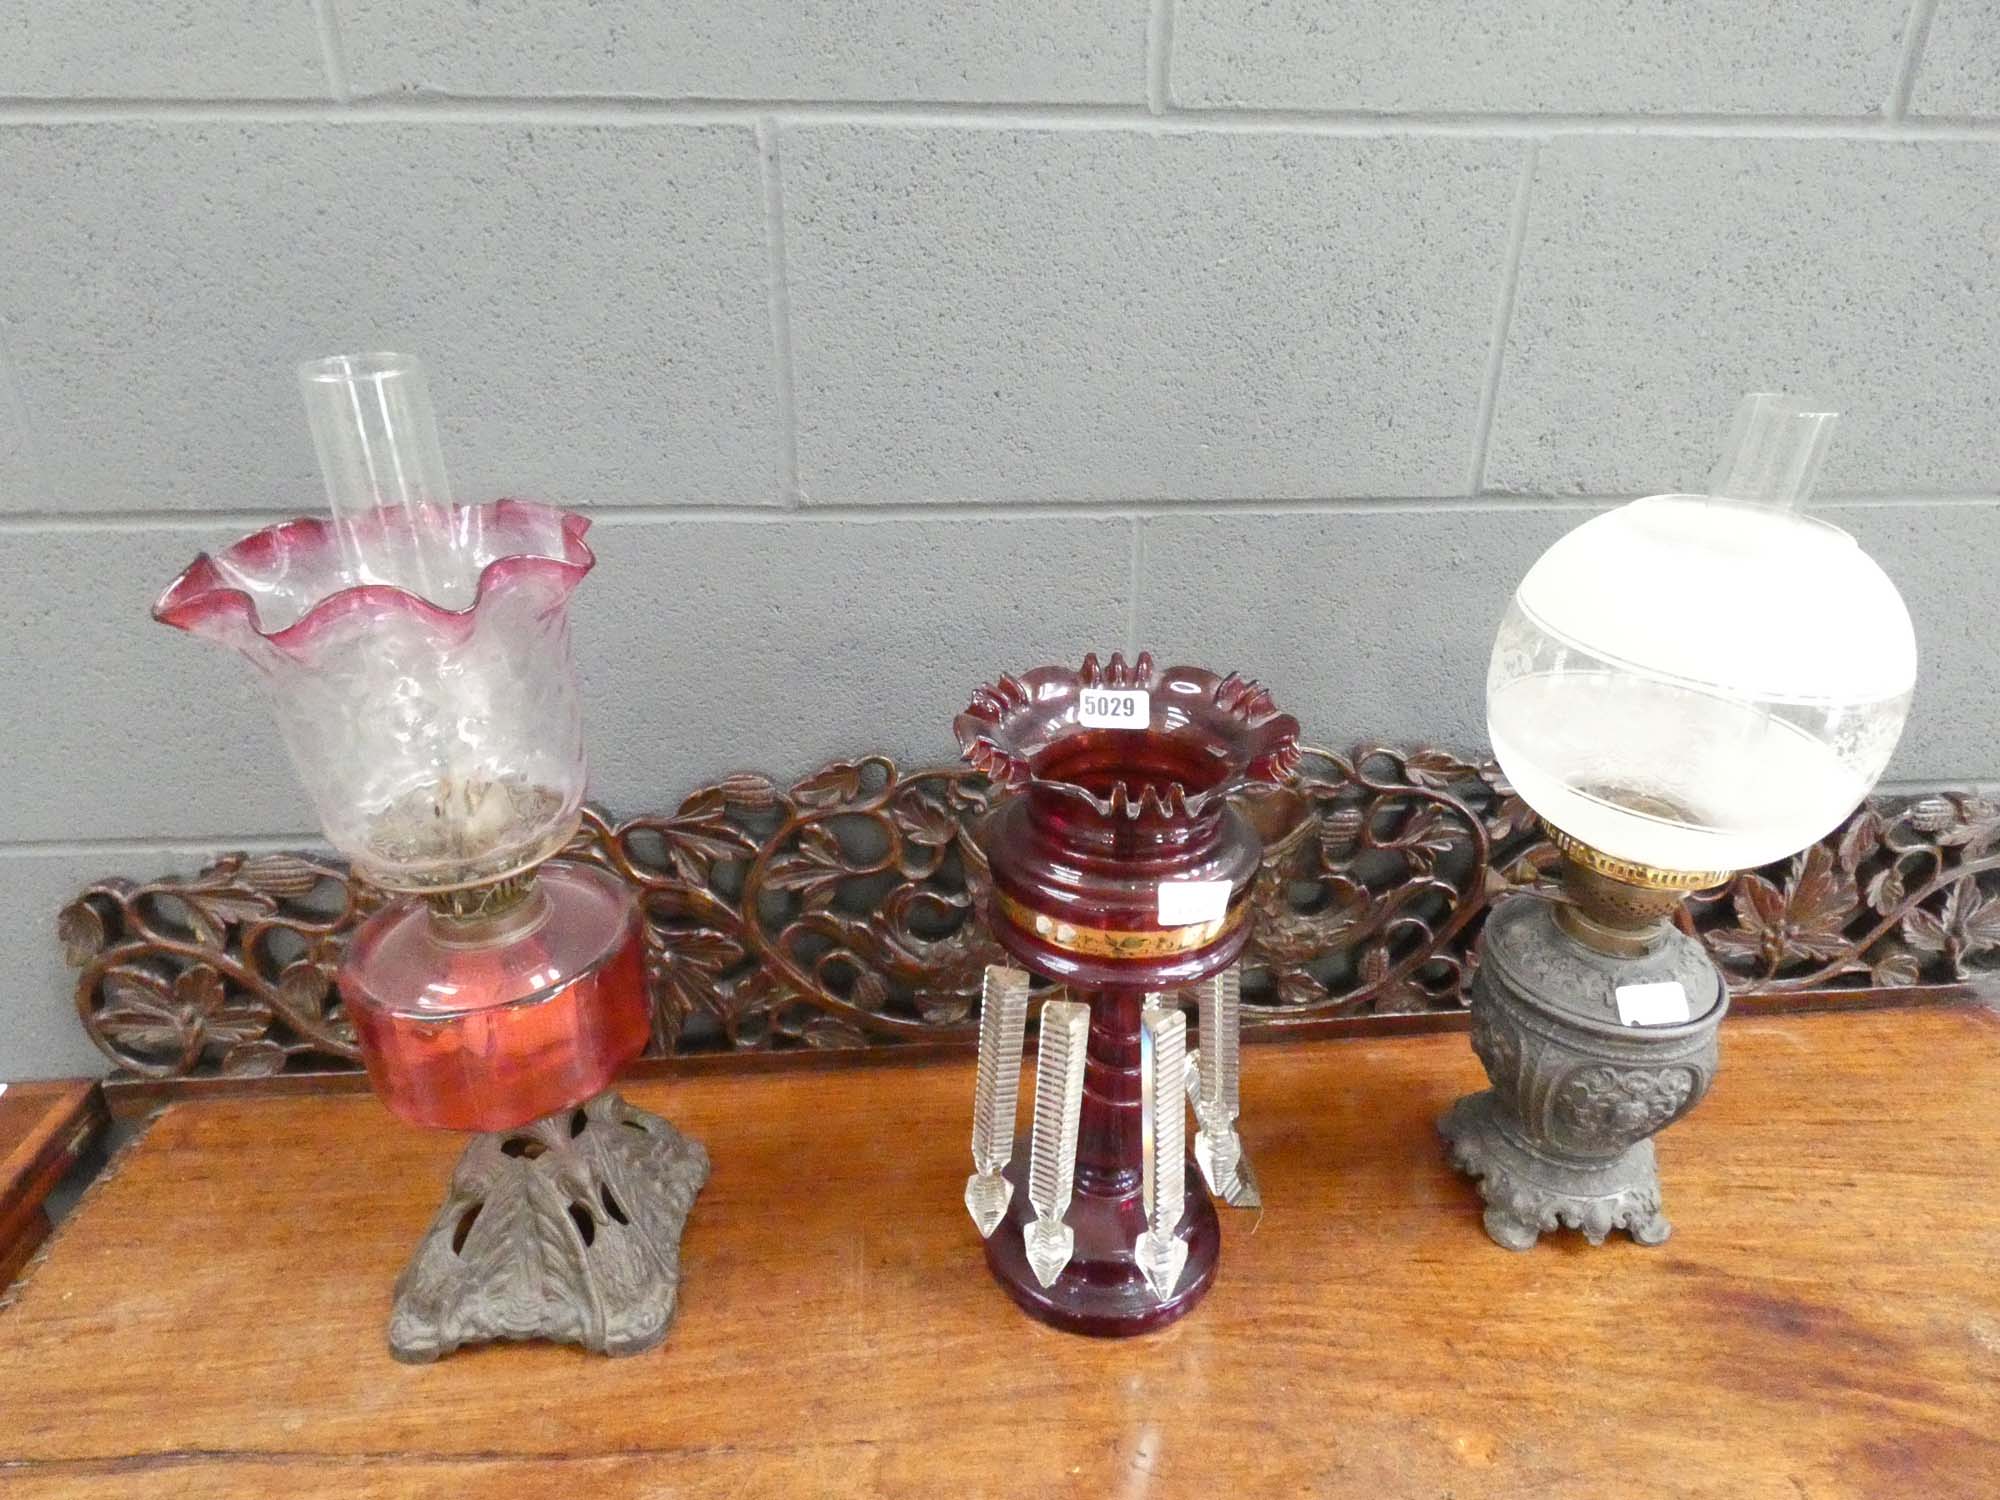 2 oil lamps and a lustre Fair condition, no obvious damage. Never been electrified